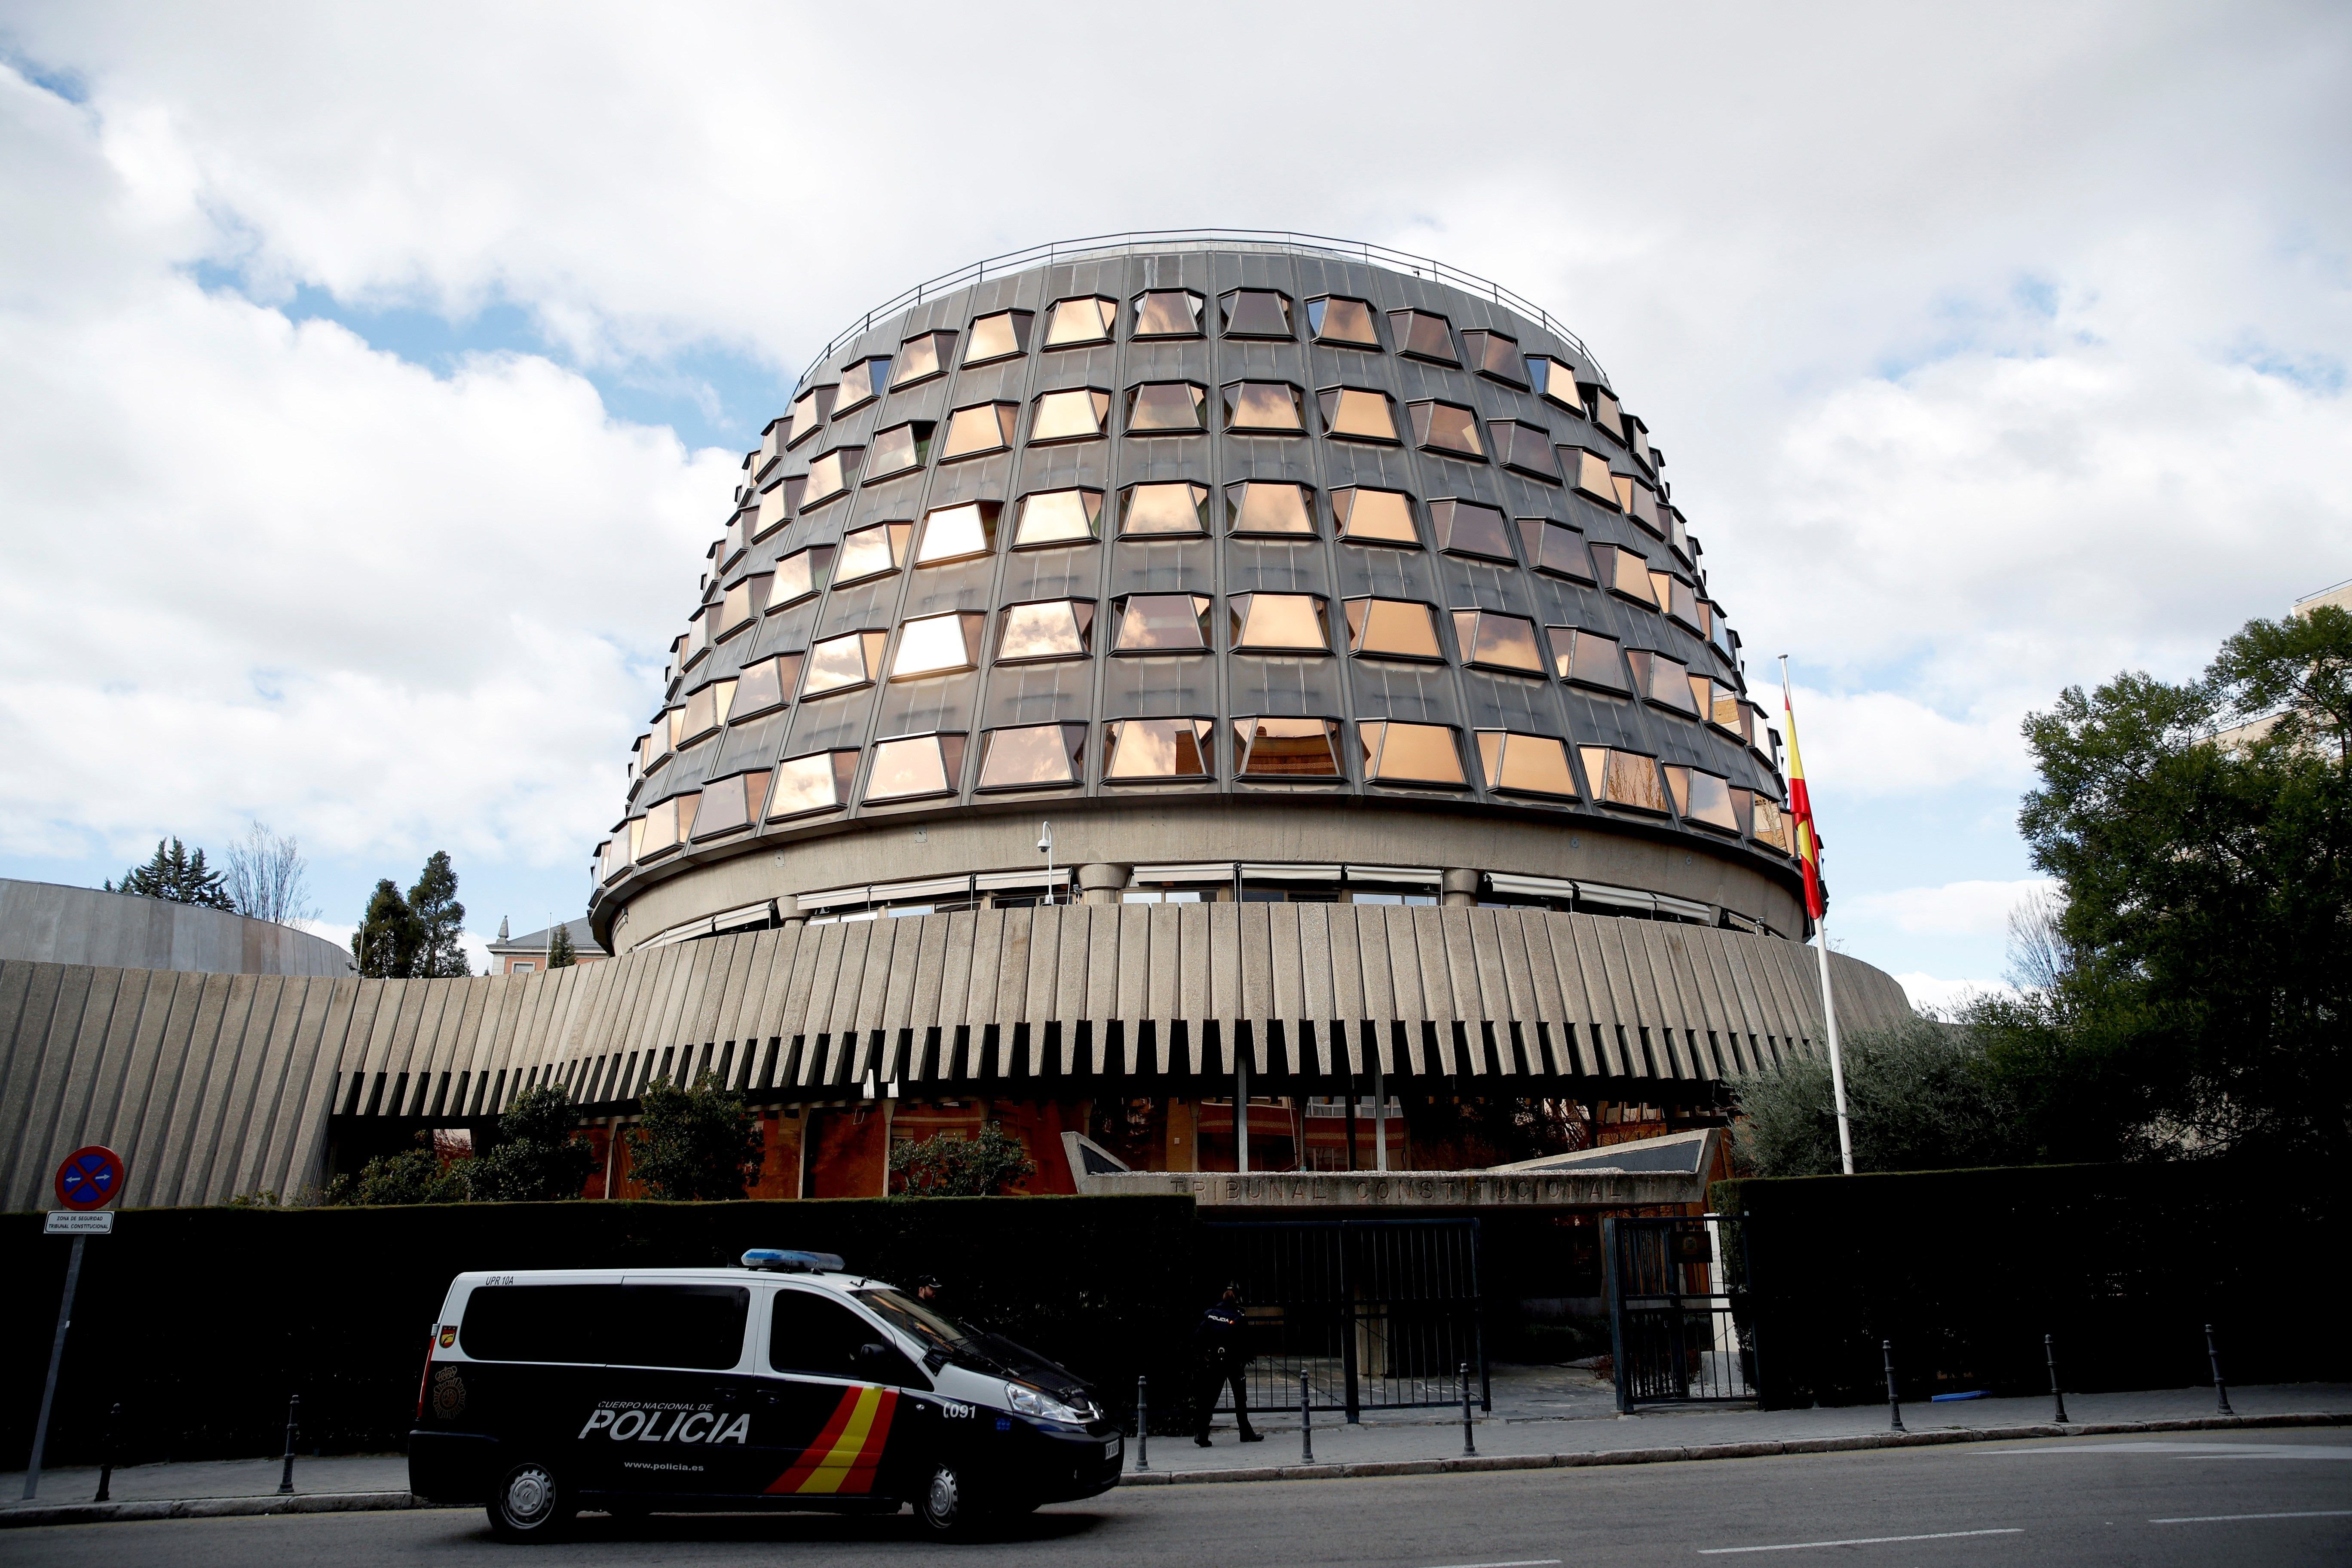 Two Spanish Constitutional Court judges criticise Supreme Court's sedition sentence